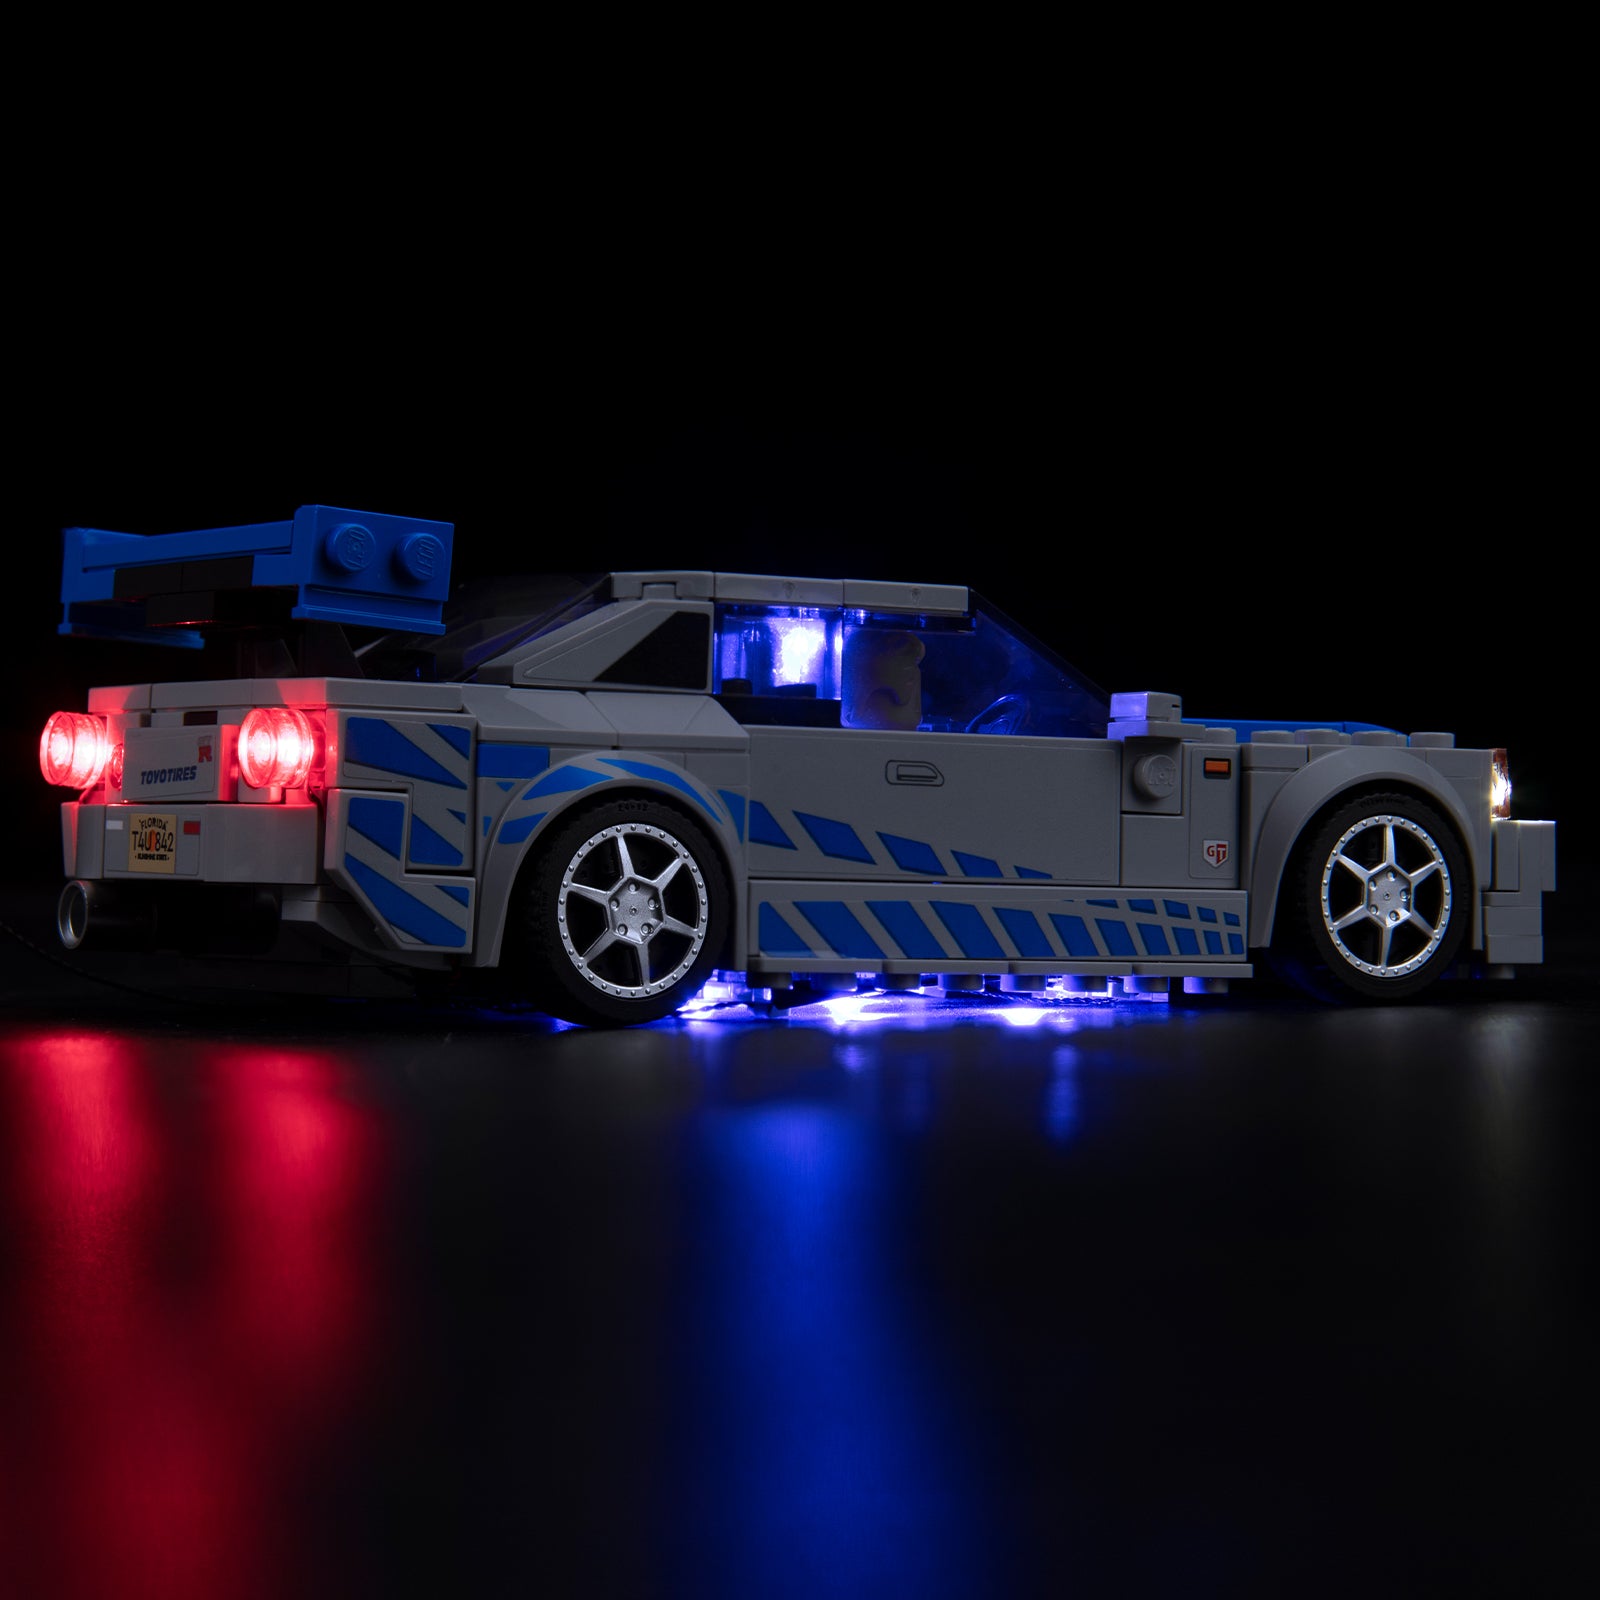  Hilighting Upgraded Led Light Kit for Lego Speed Champions 2  Fast 2 Furious Nissan Skyline GT-R (R34) Race Car Toy Model Building Kit,  Compatible with Lego 76917(Model Not Included) : Everything